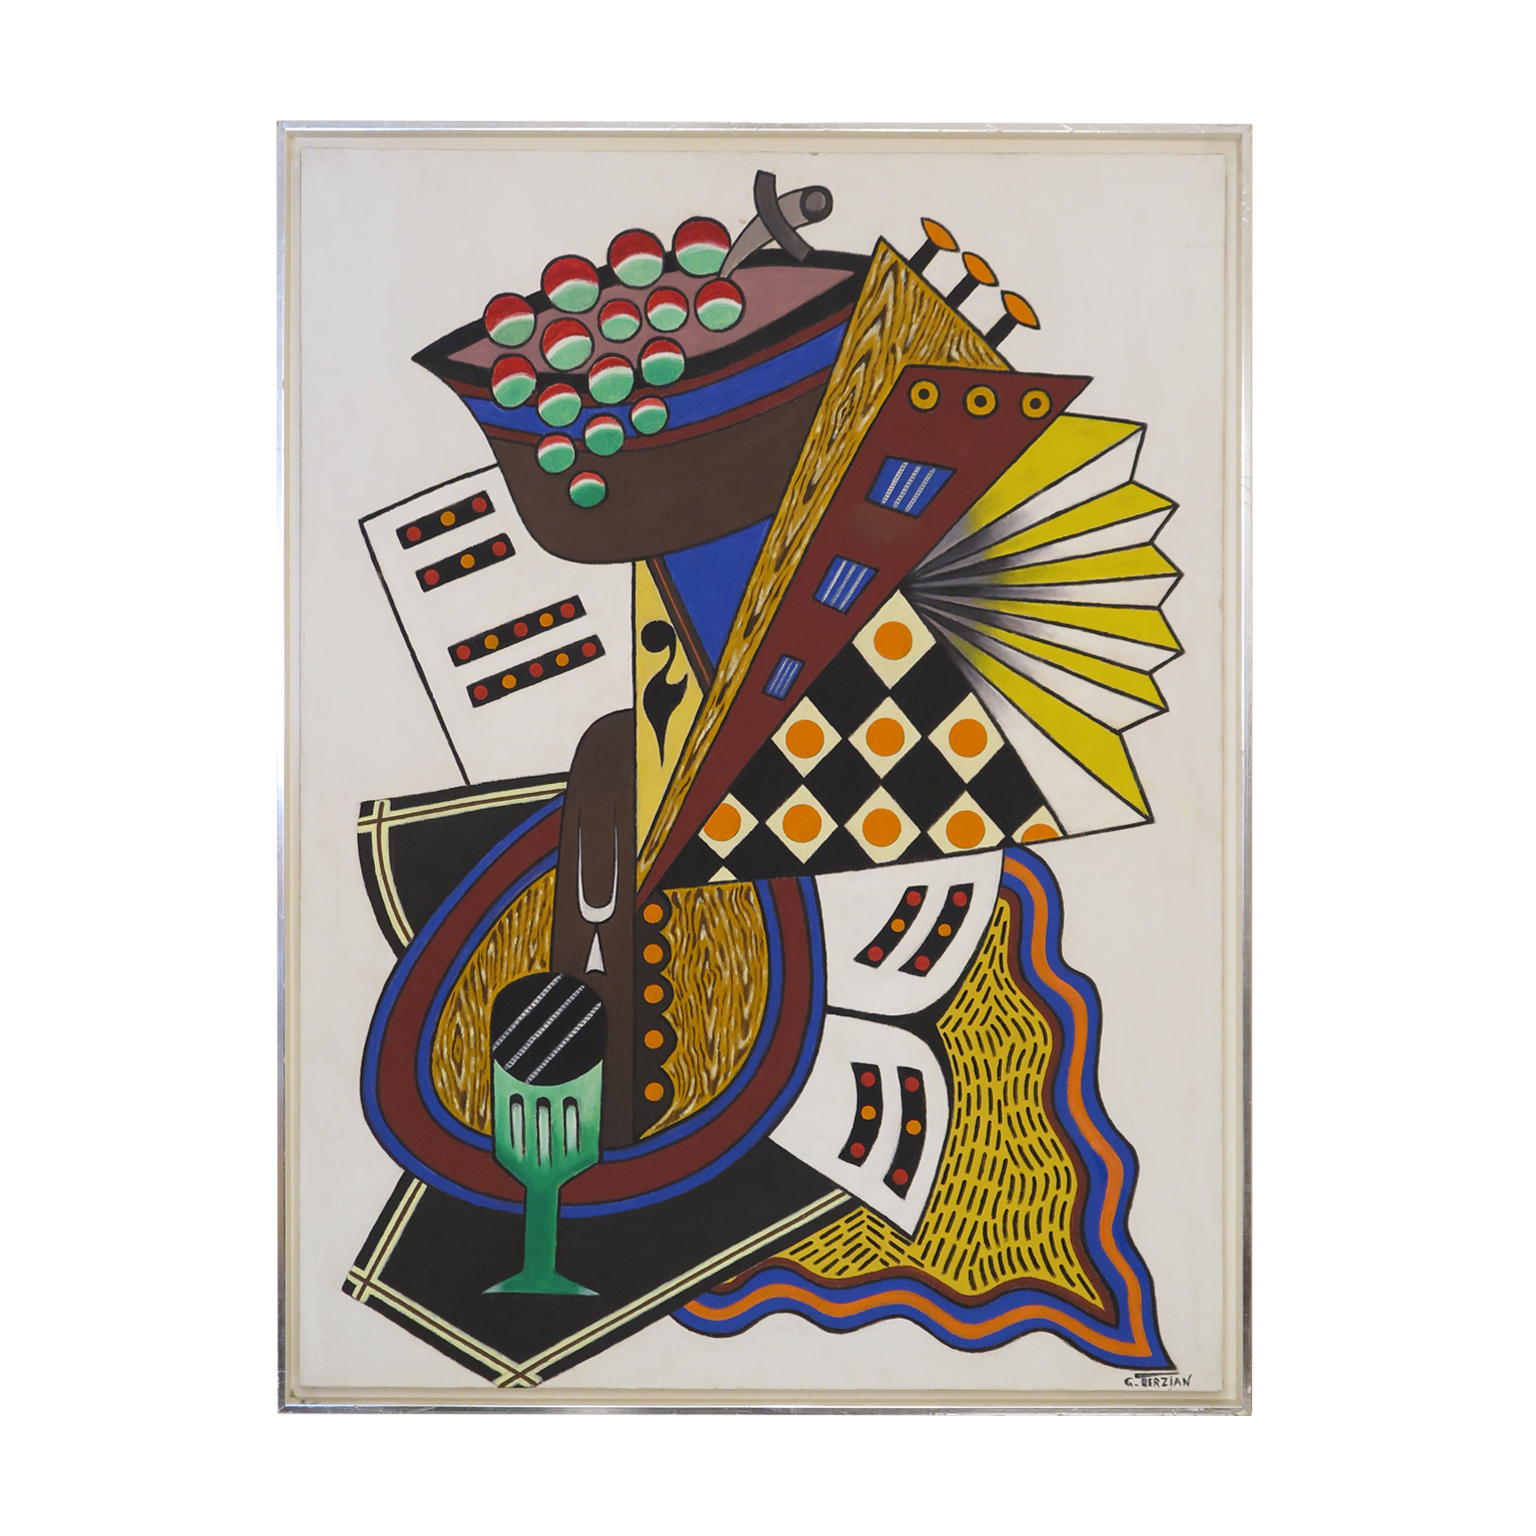 Colorful cubist style painting by Georges Terzian depicting musical interments and sheet music.